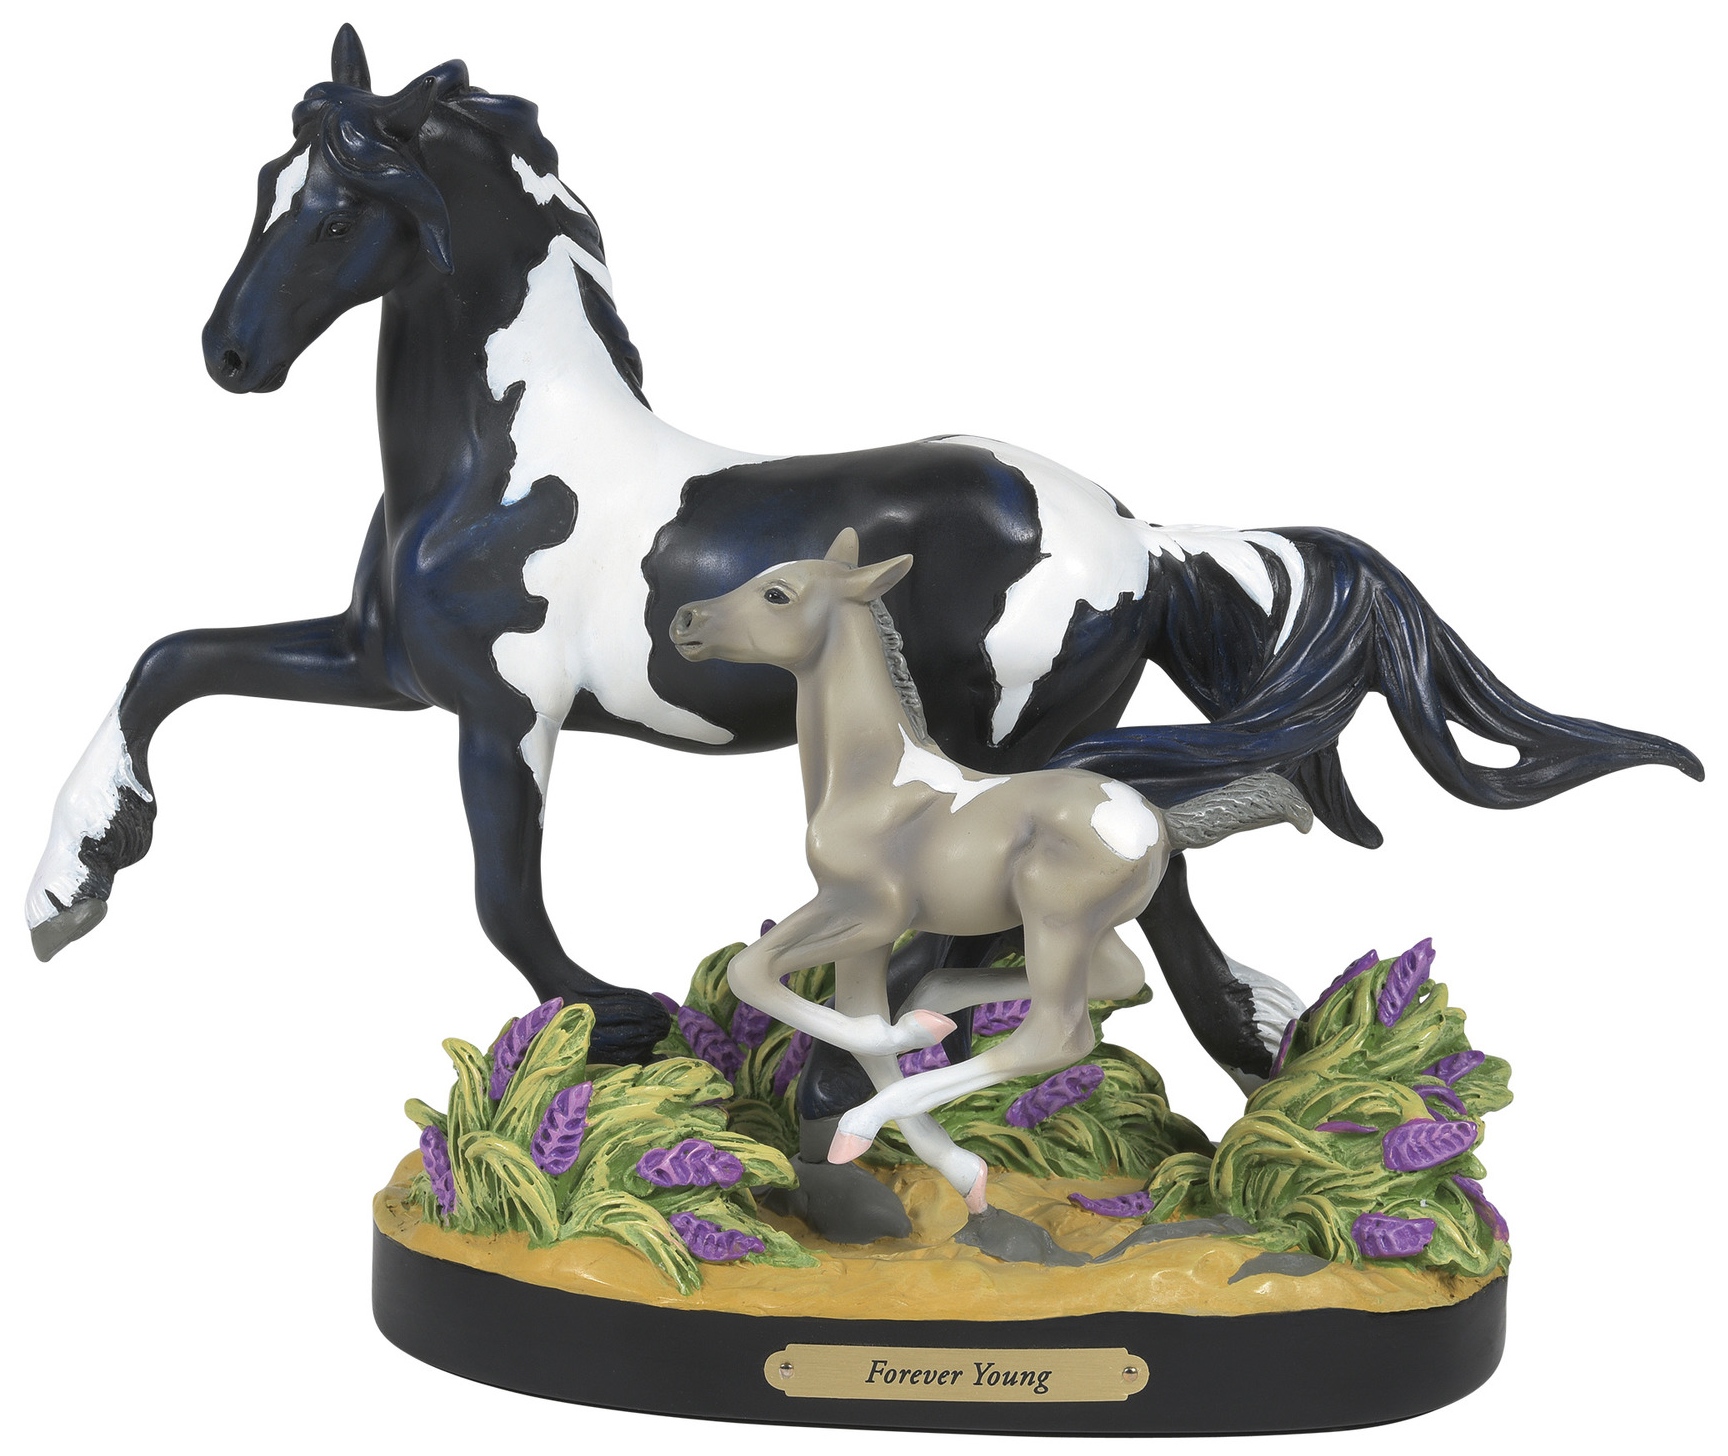 Trail of Painted Ponies 6008346 Forever Young Horse Figurine